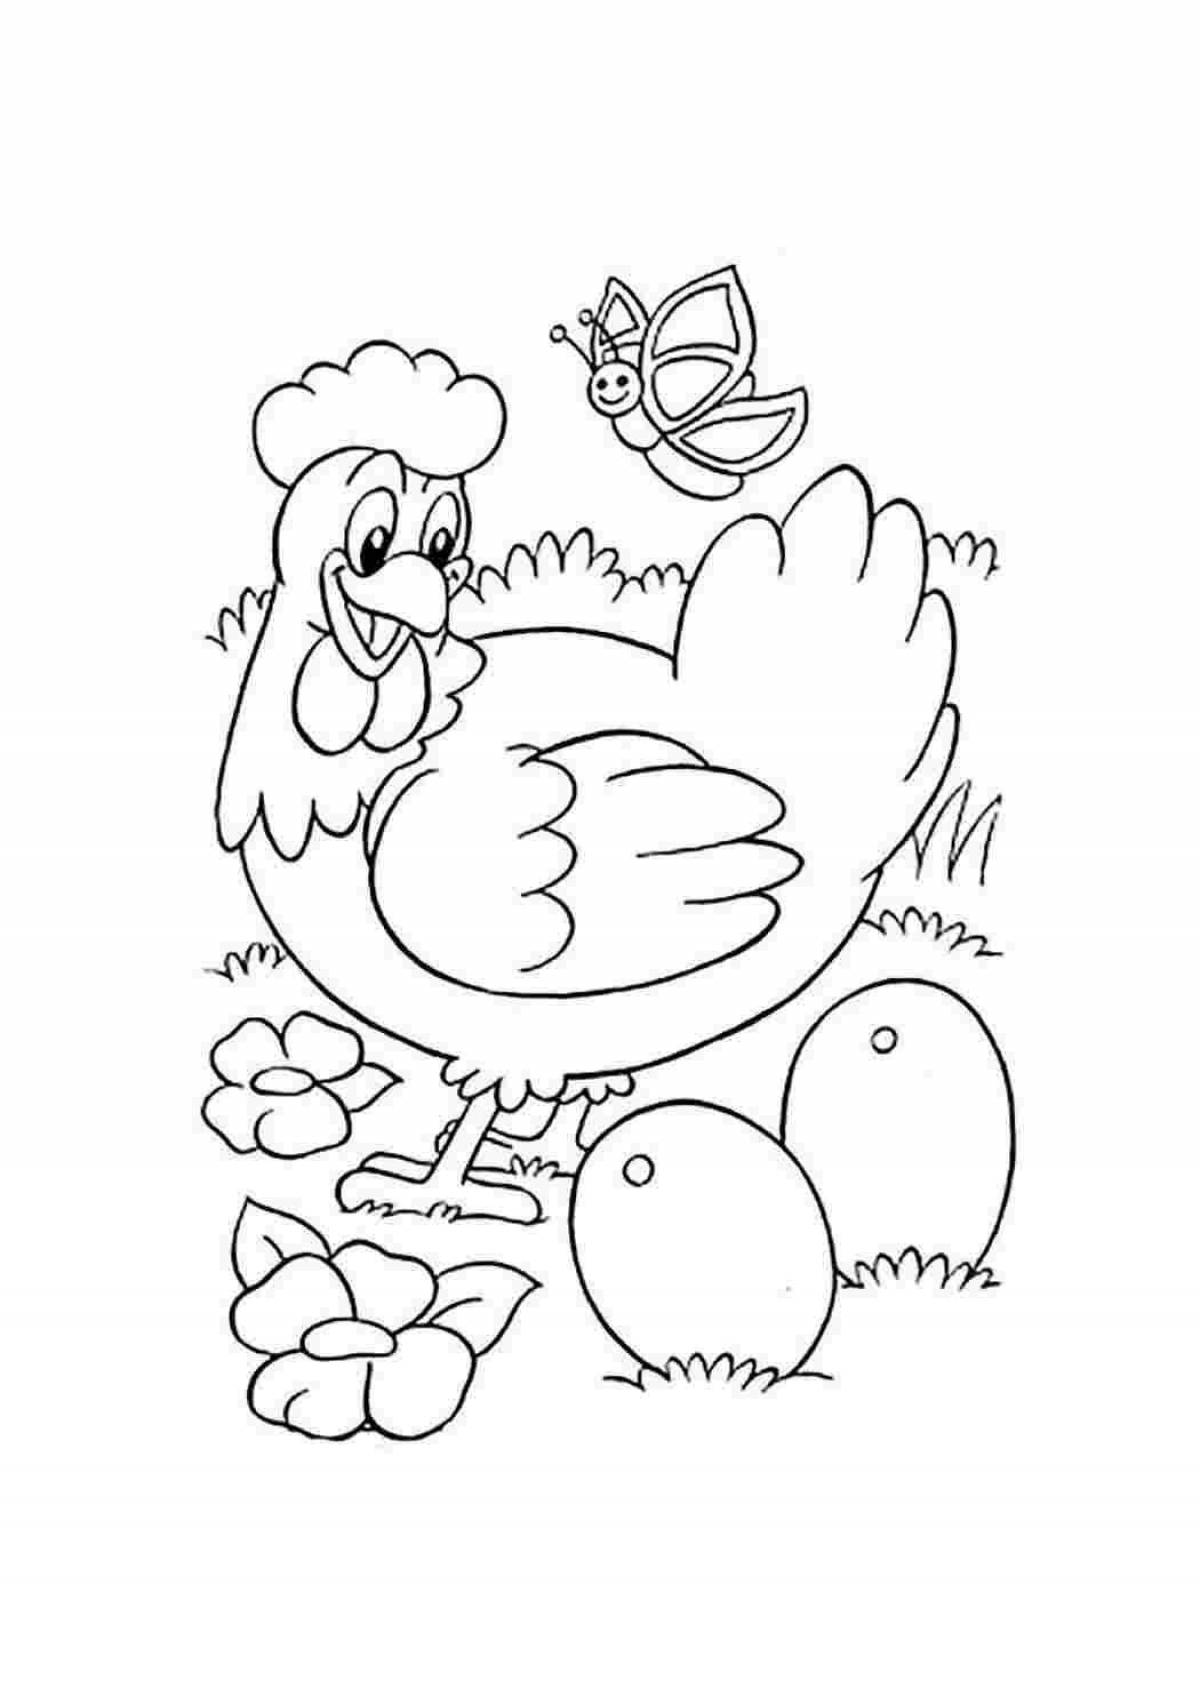 Adorable chicken coloring pages for kids